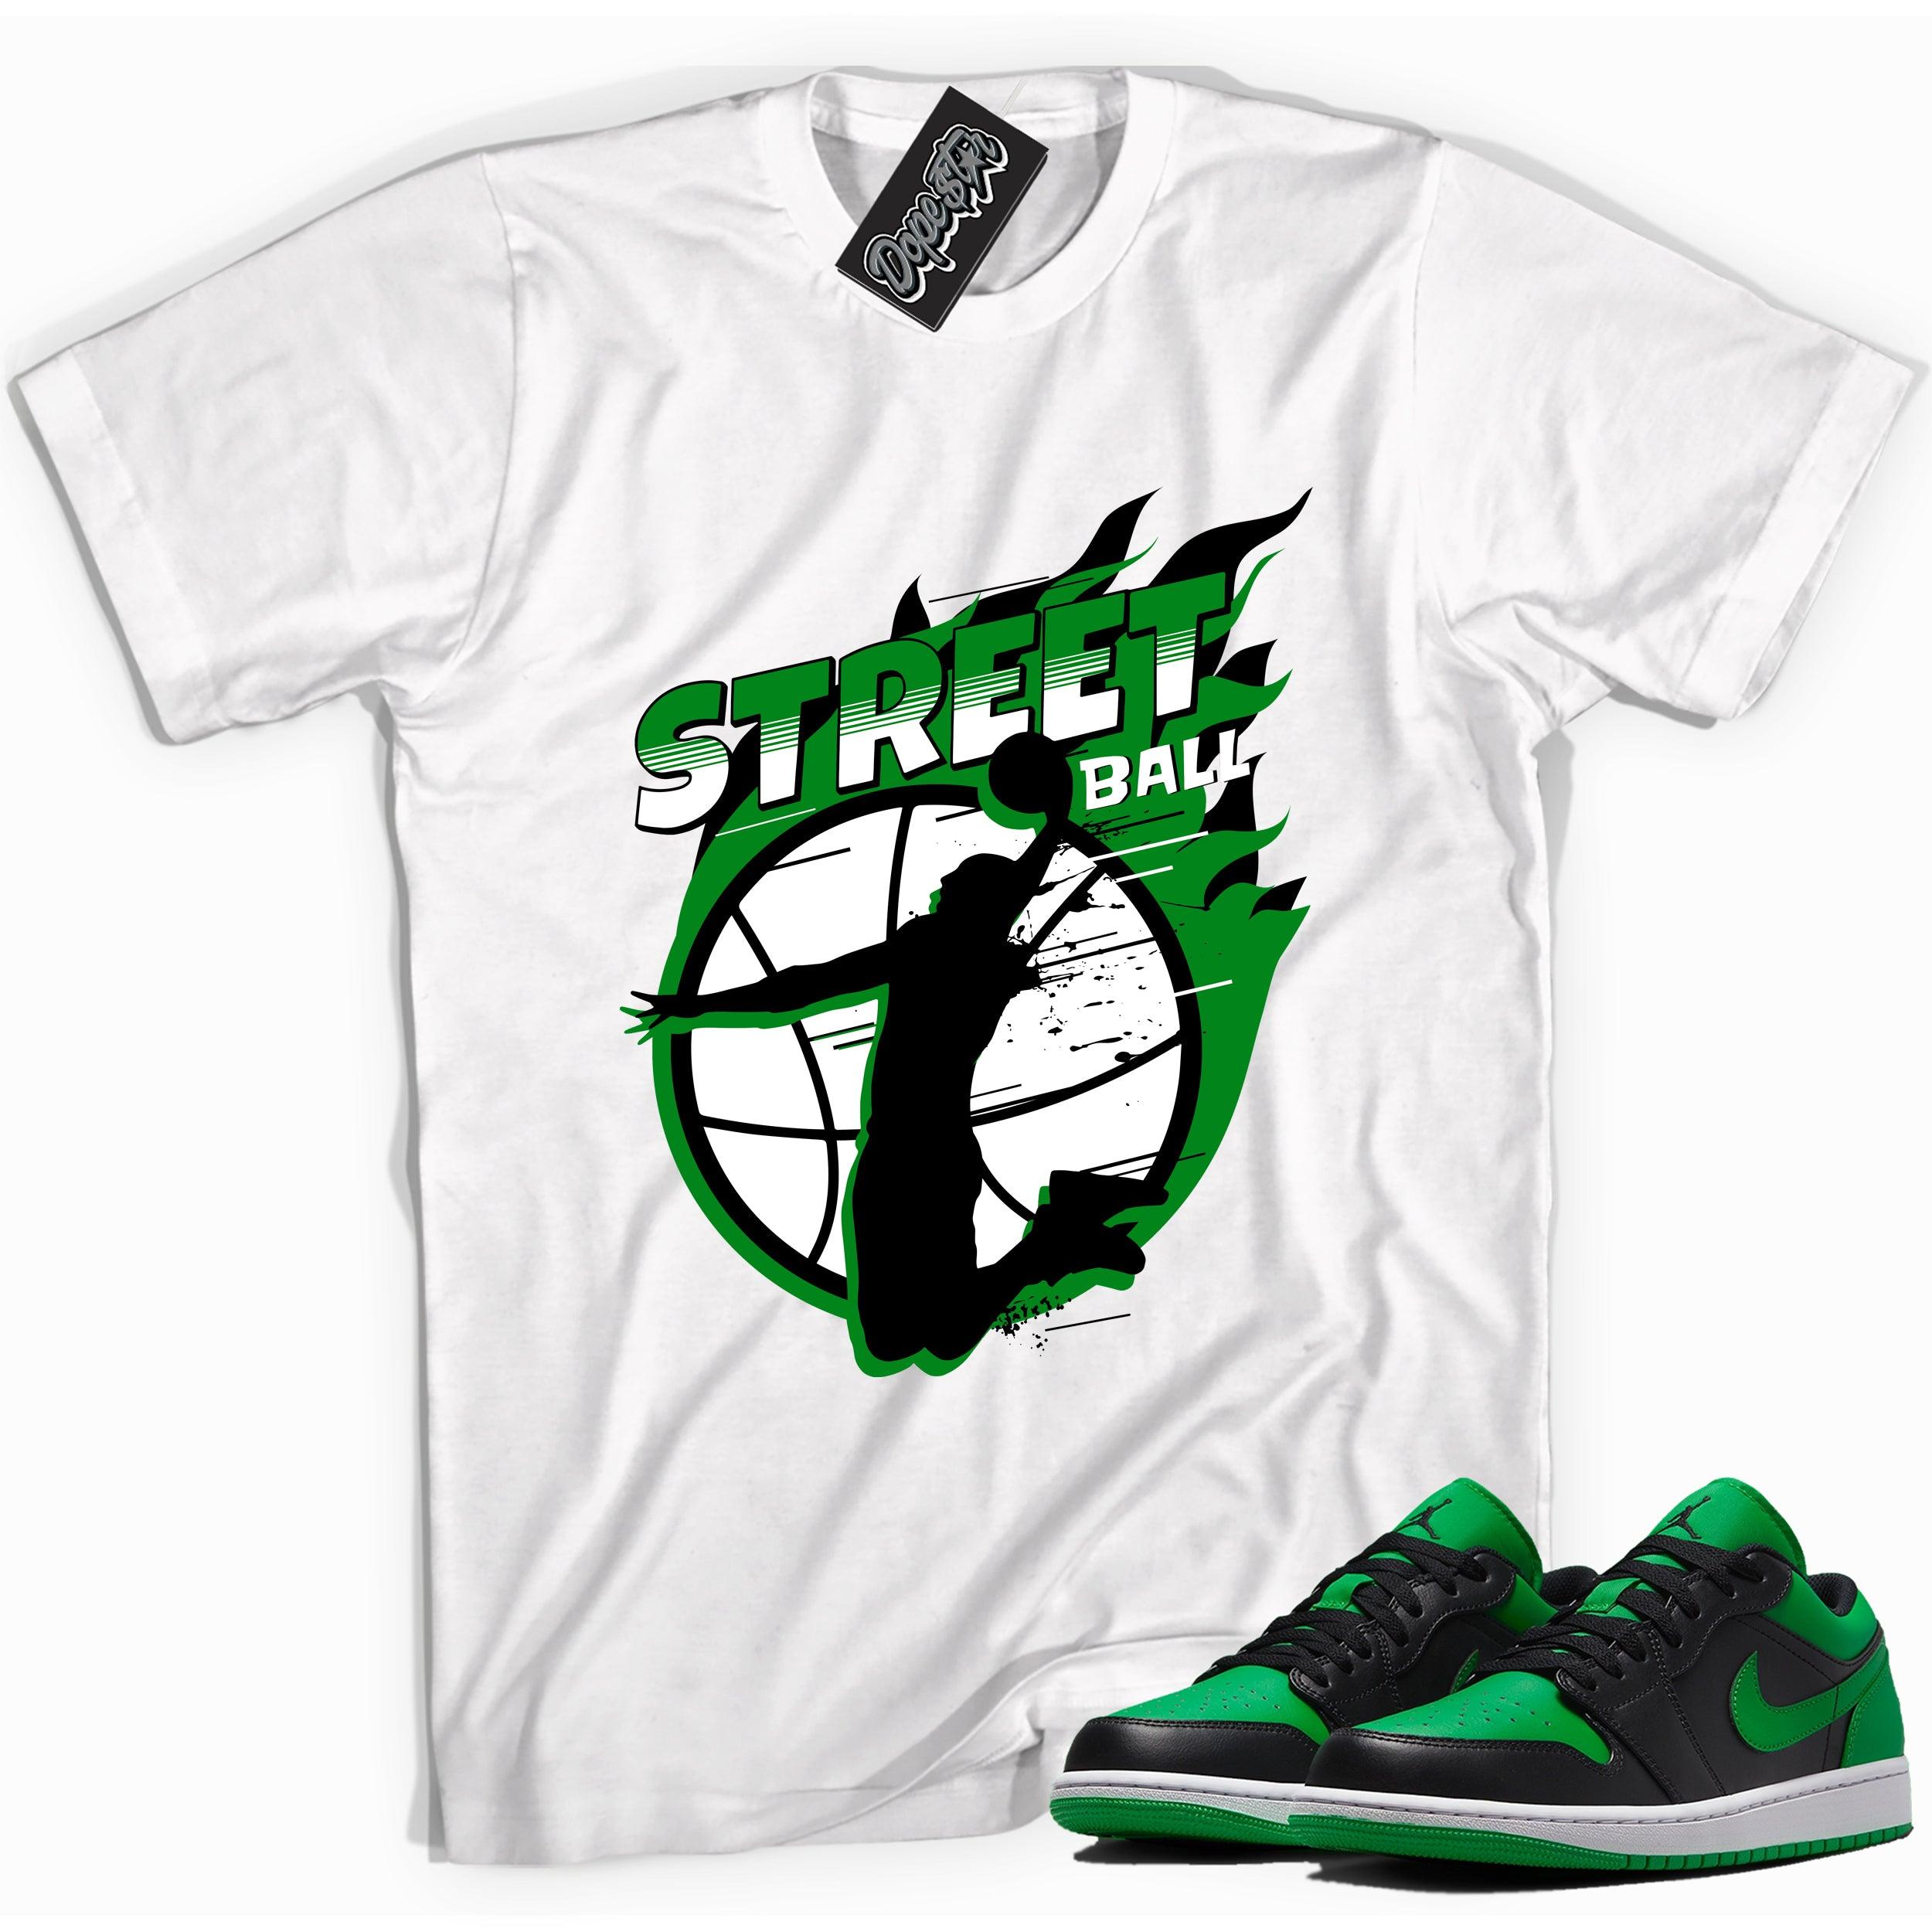 Cool white graphic tee with 'street ball' print, that perfectly matches Air Jordan 1 Low Lucky Green sneakers